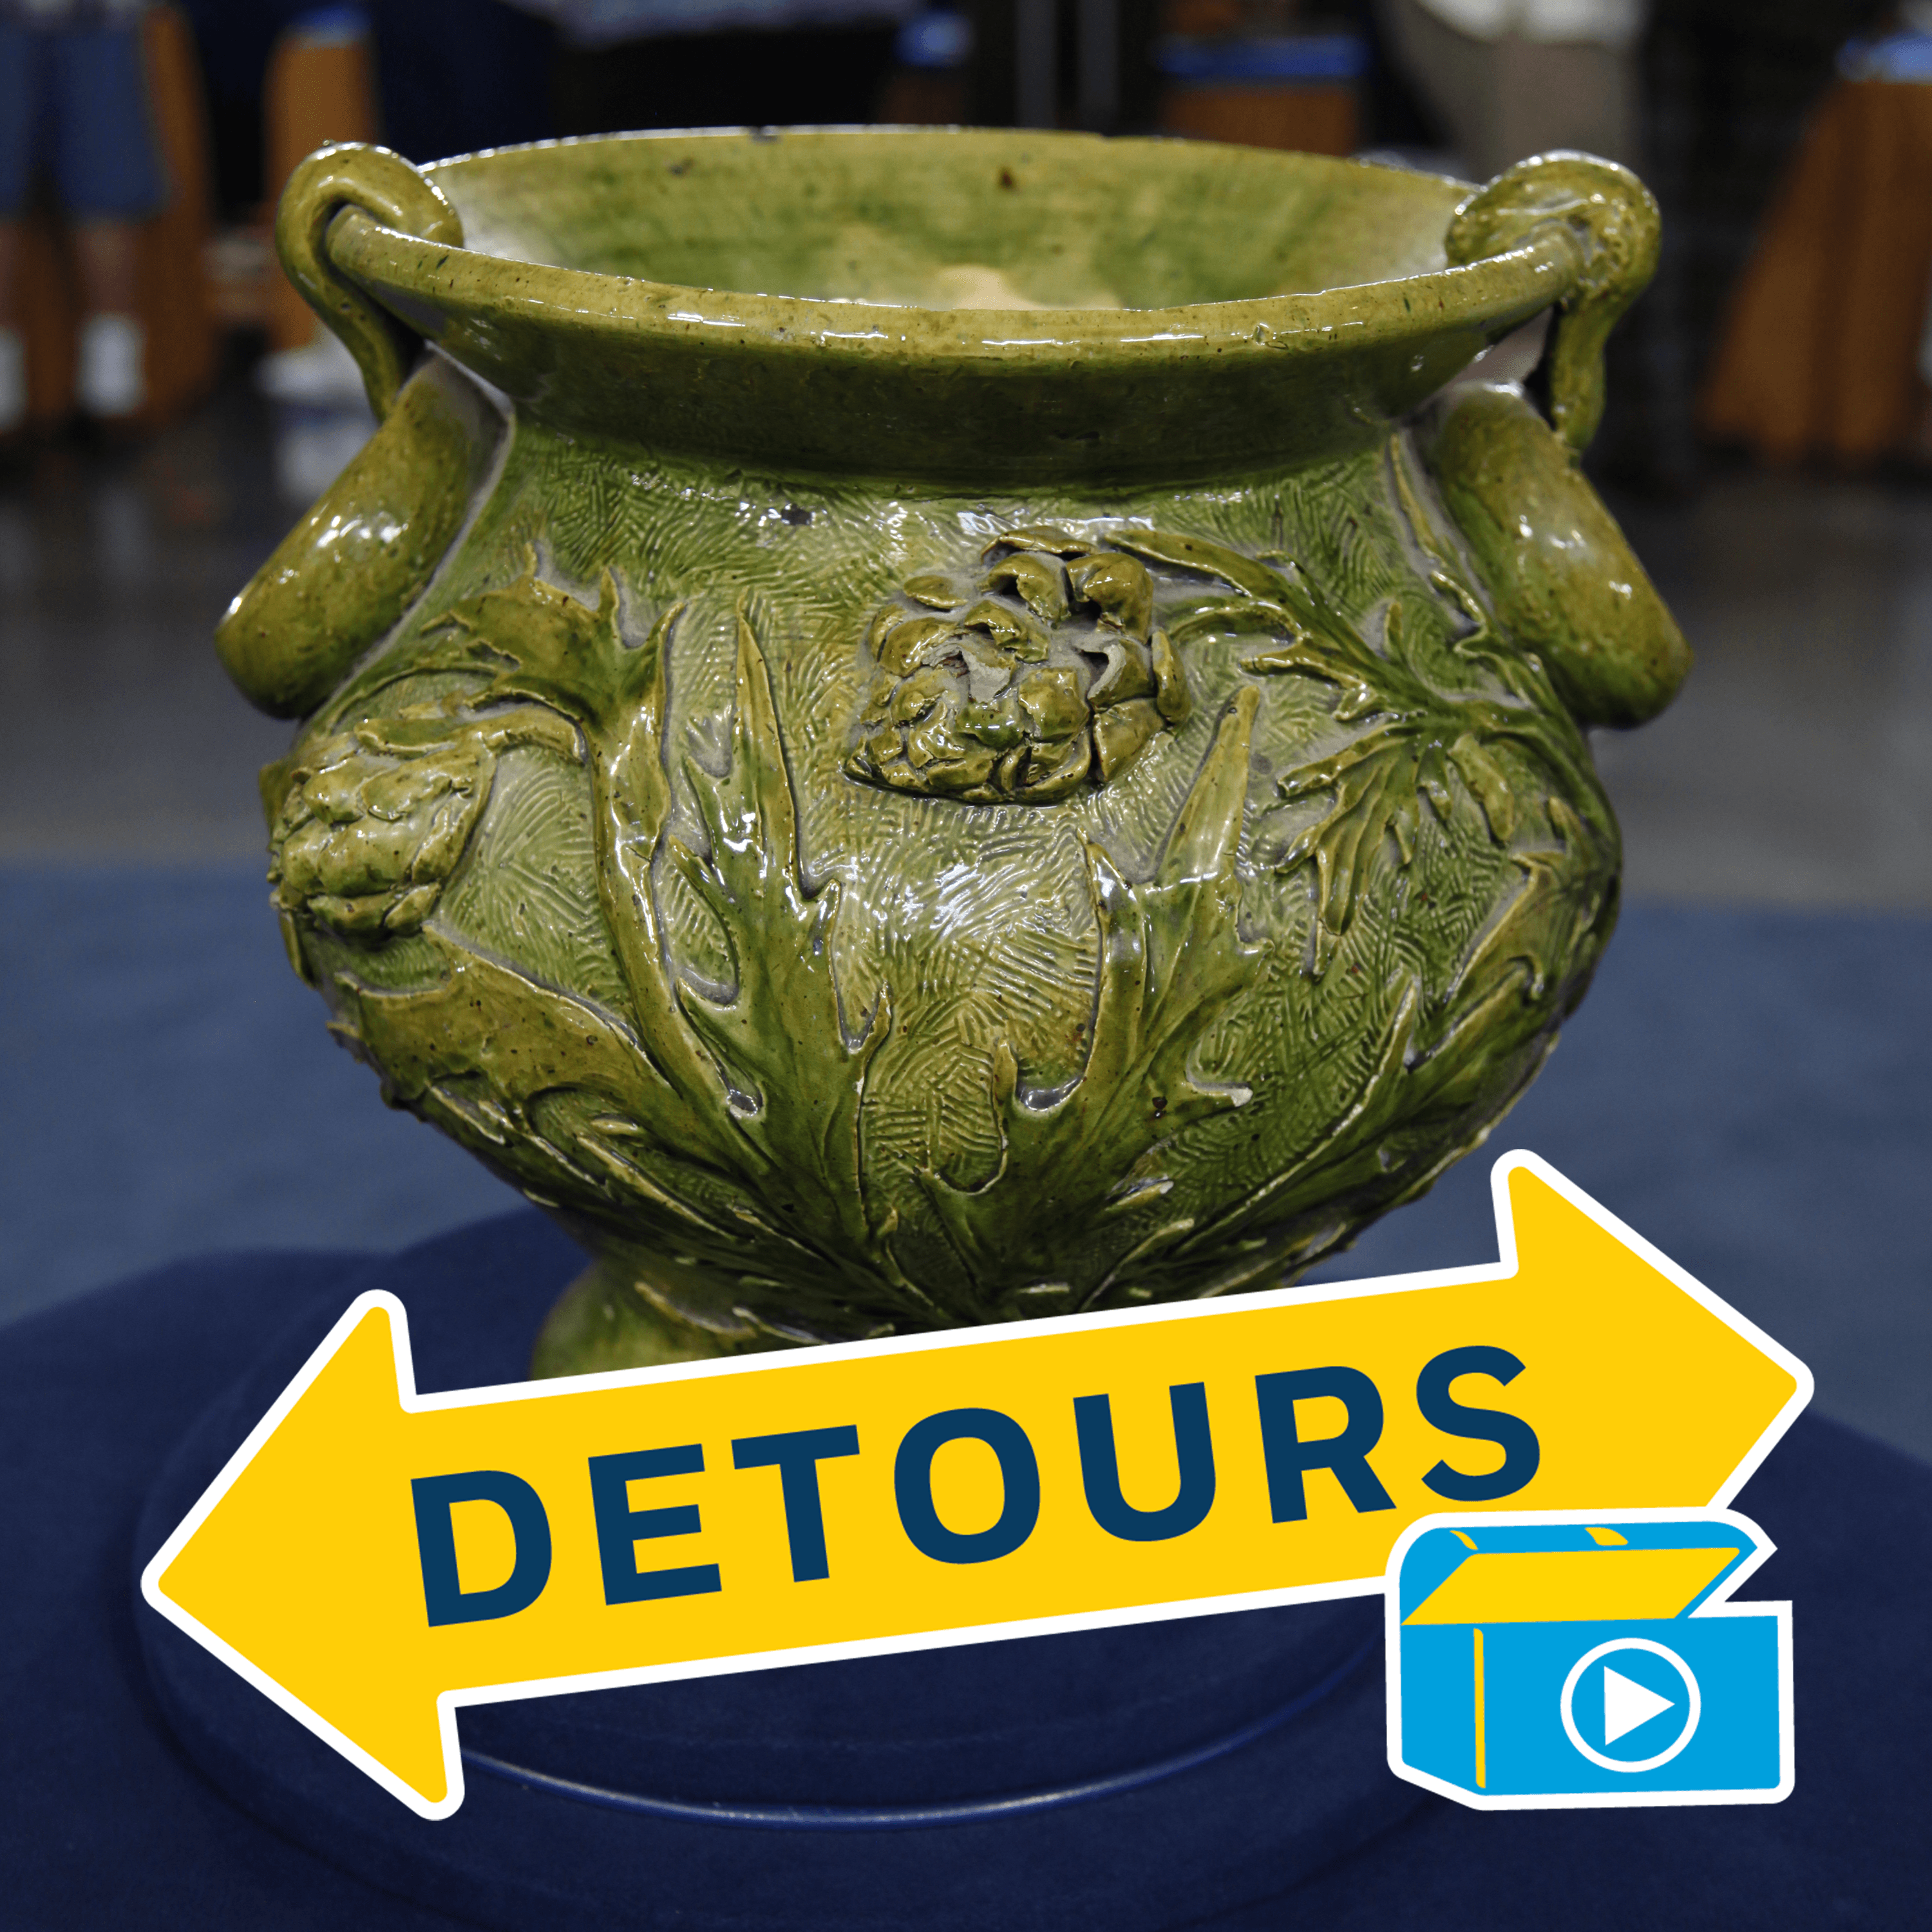 Thumbnail for "Theresa's Choice – When an inherited piece of New Orleans Art Pottery is appraised for thousands, does it still pay to keep it in the family? ".